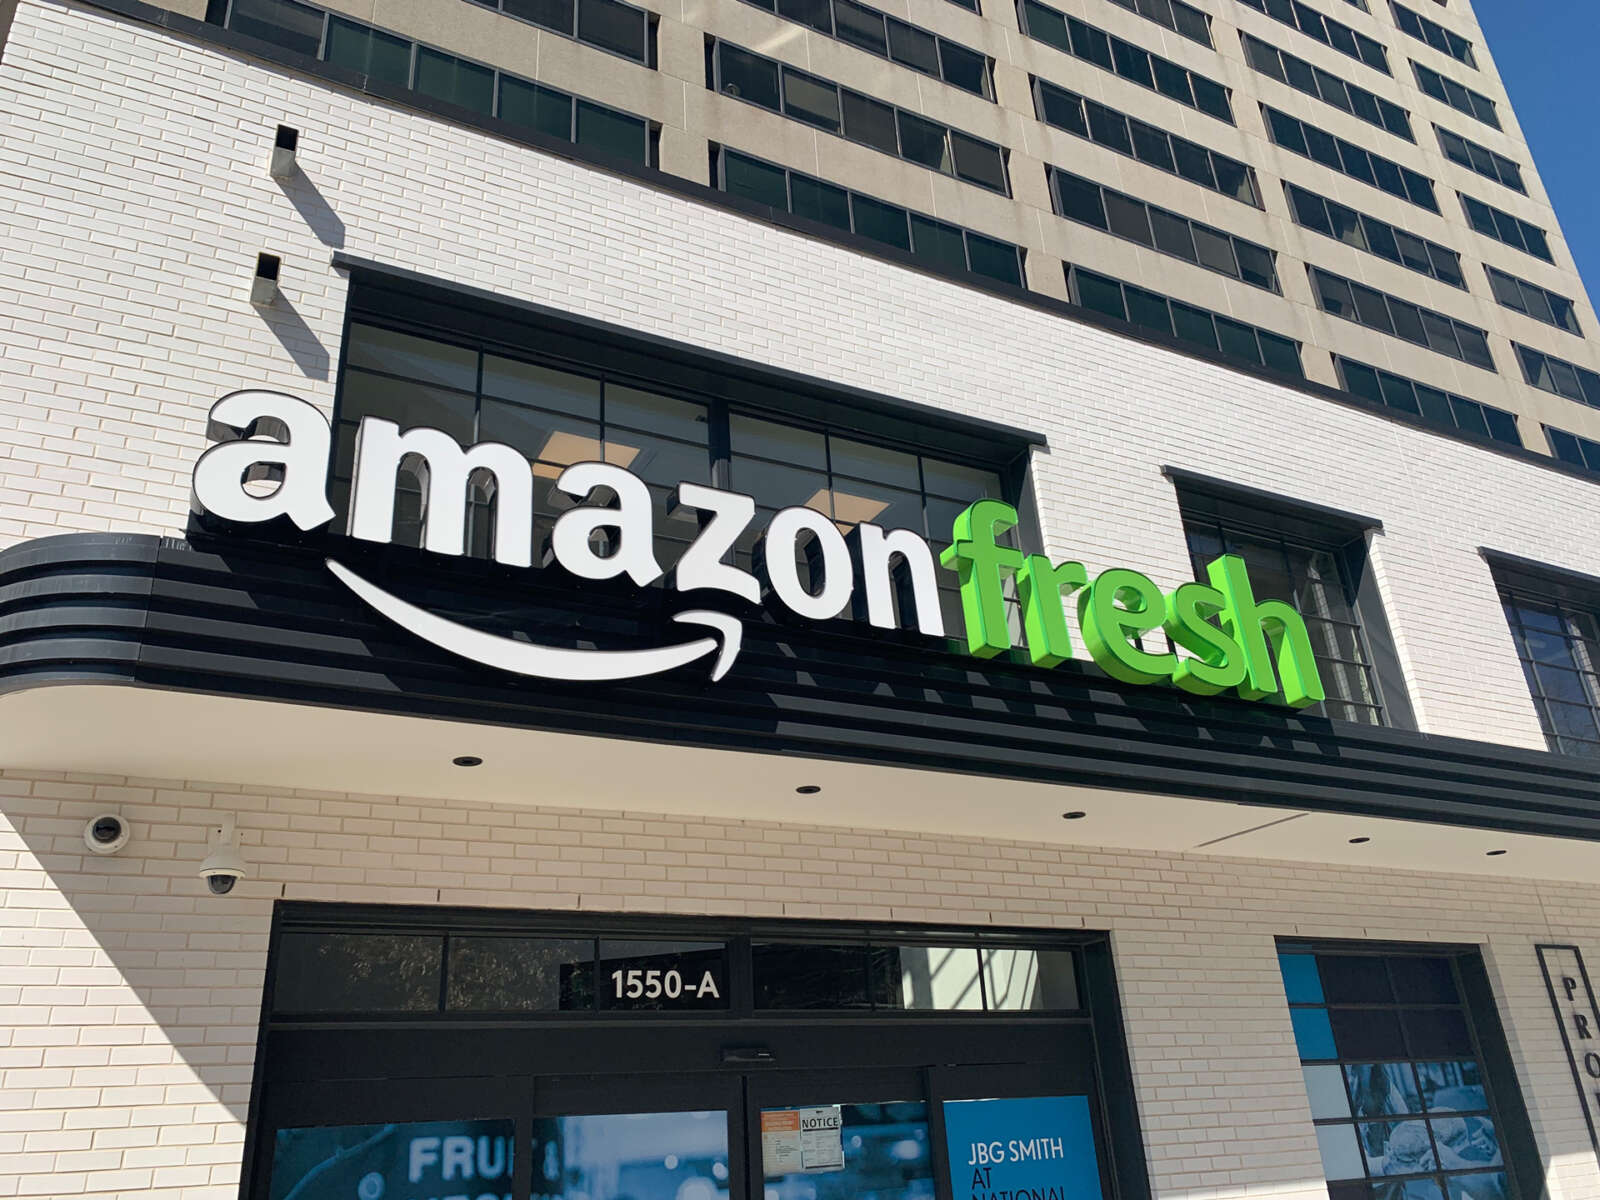 Fresh Opens First Store In Greater Washington DC Area 